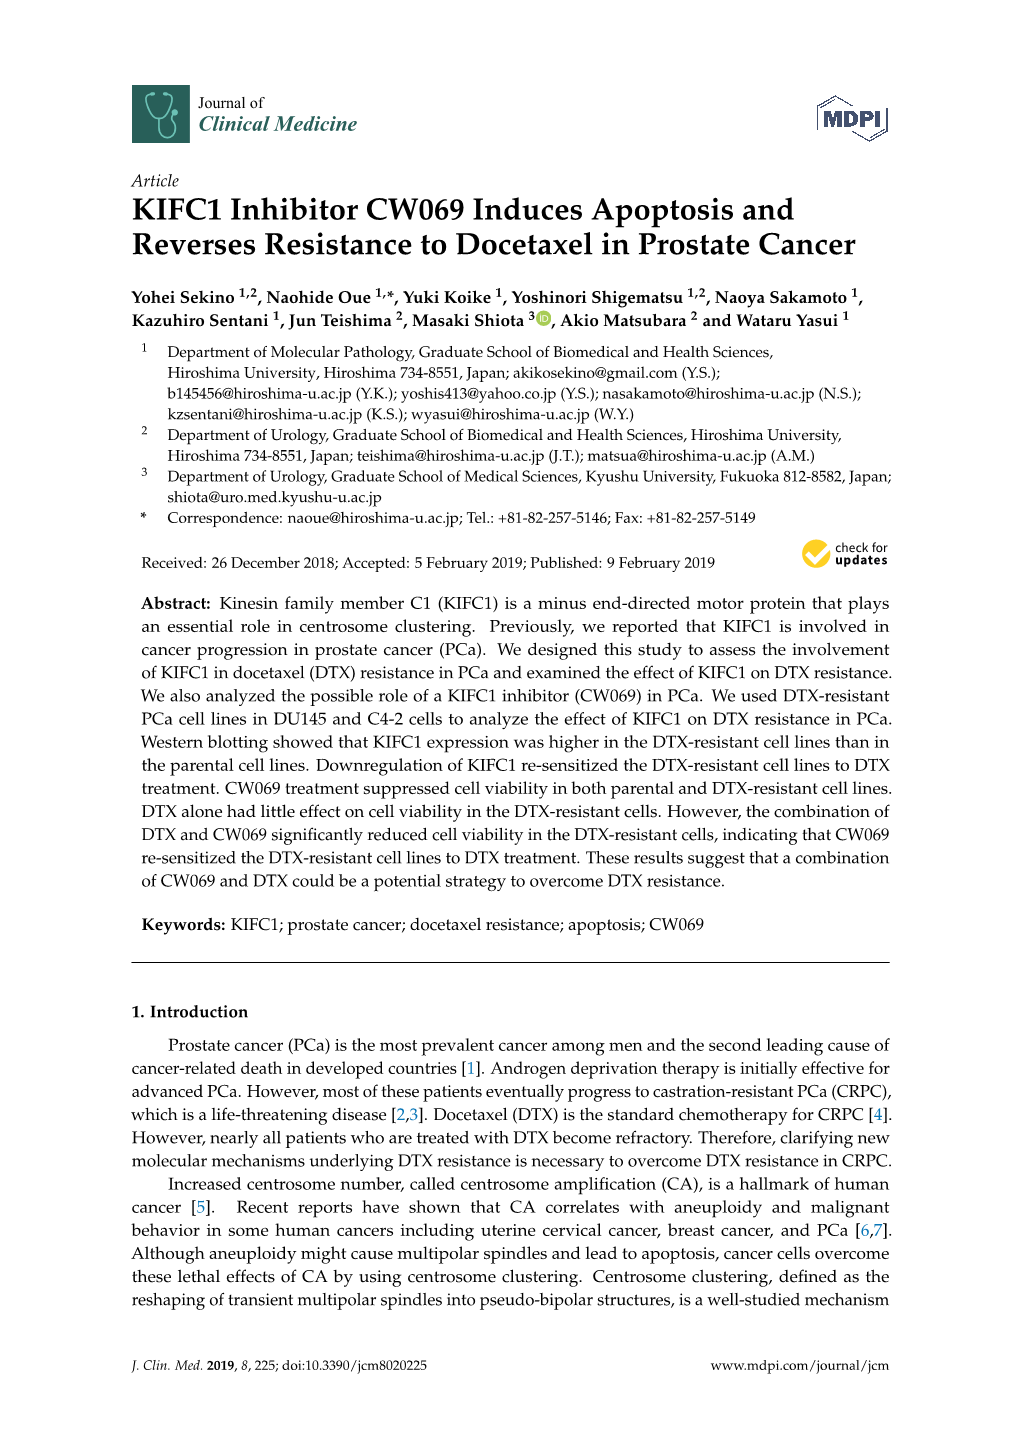 KIFC1 Inhibitor CW069 Induces Apoptosis and Reverses Resistance to Docetaxel in Prostate Cancer